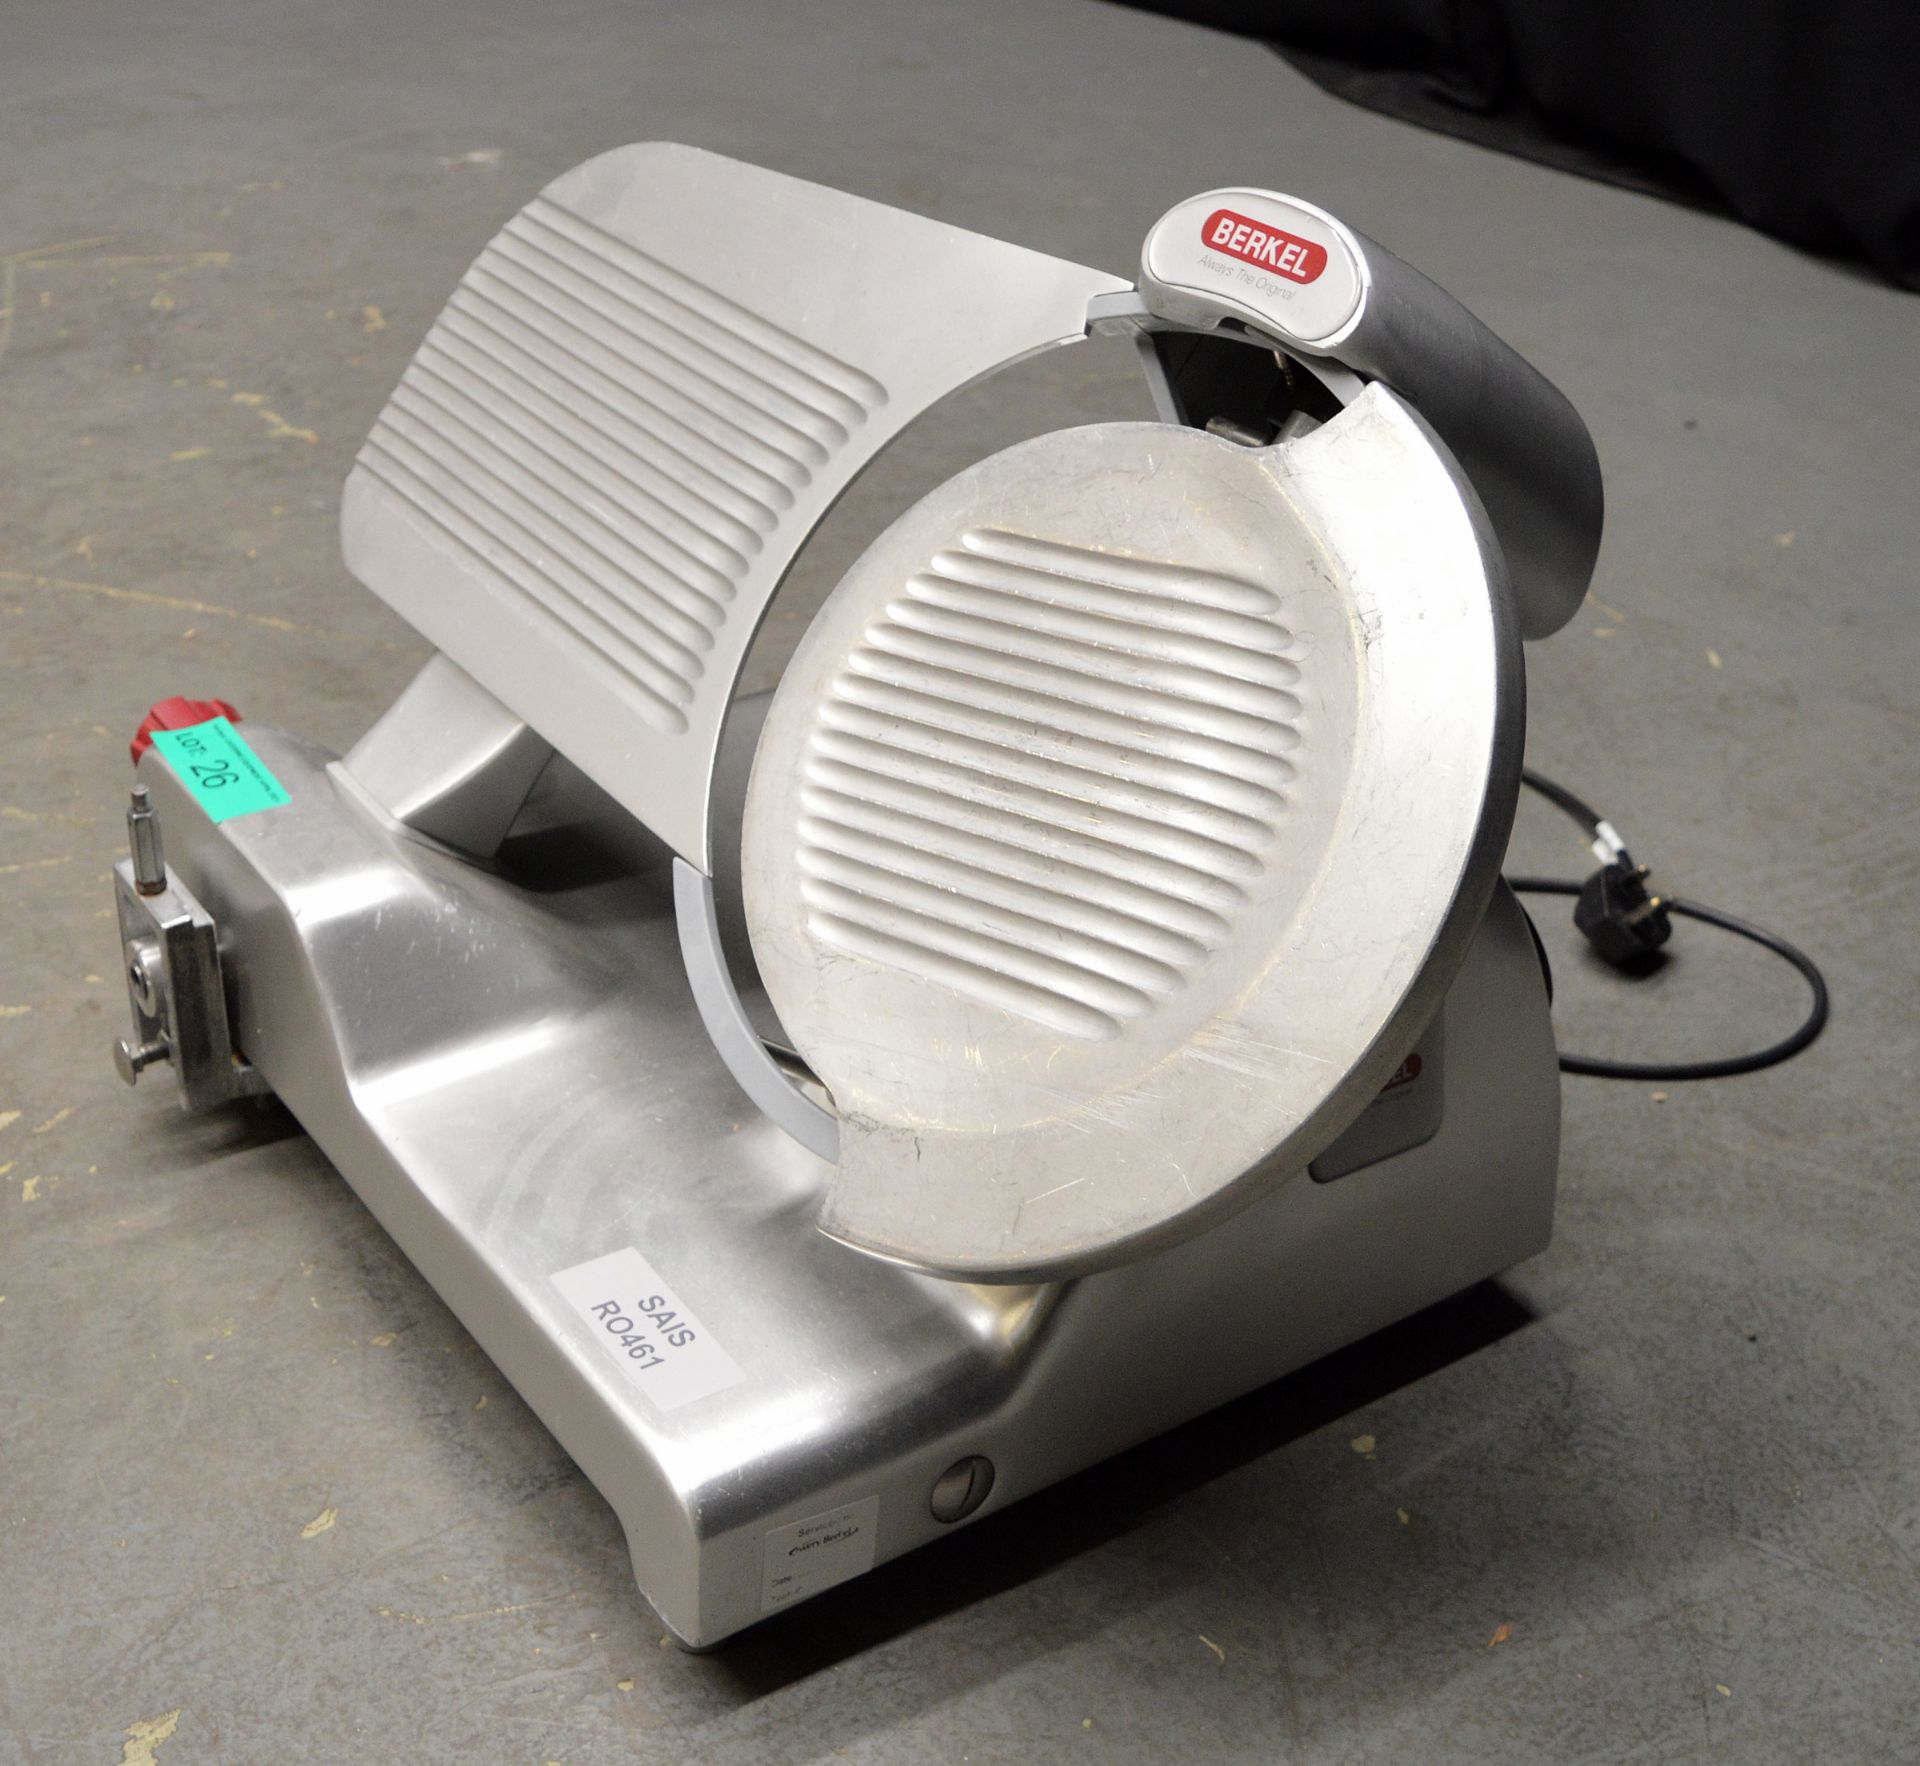 Berkel BSPGL04011A0F 12" Commercial Cooked Meat / Bacon Slicer, single phase electric - Image 3 of 5